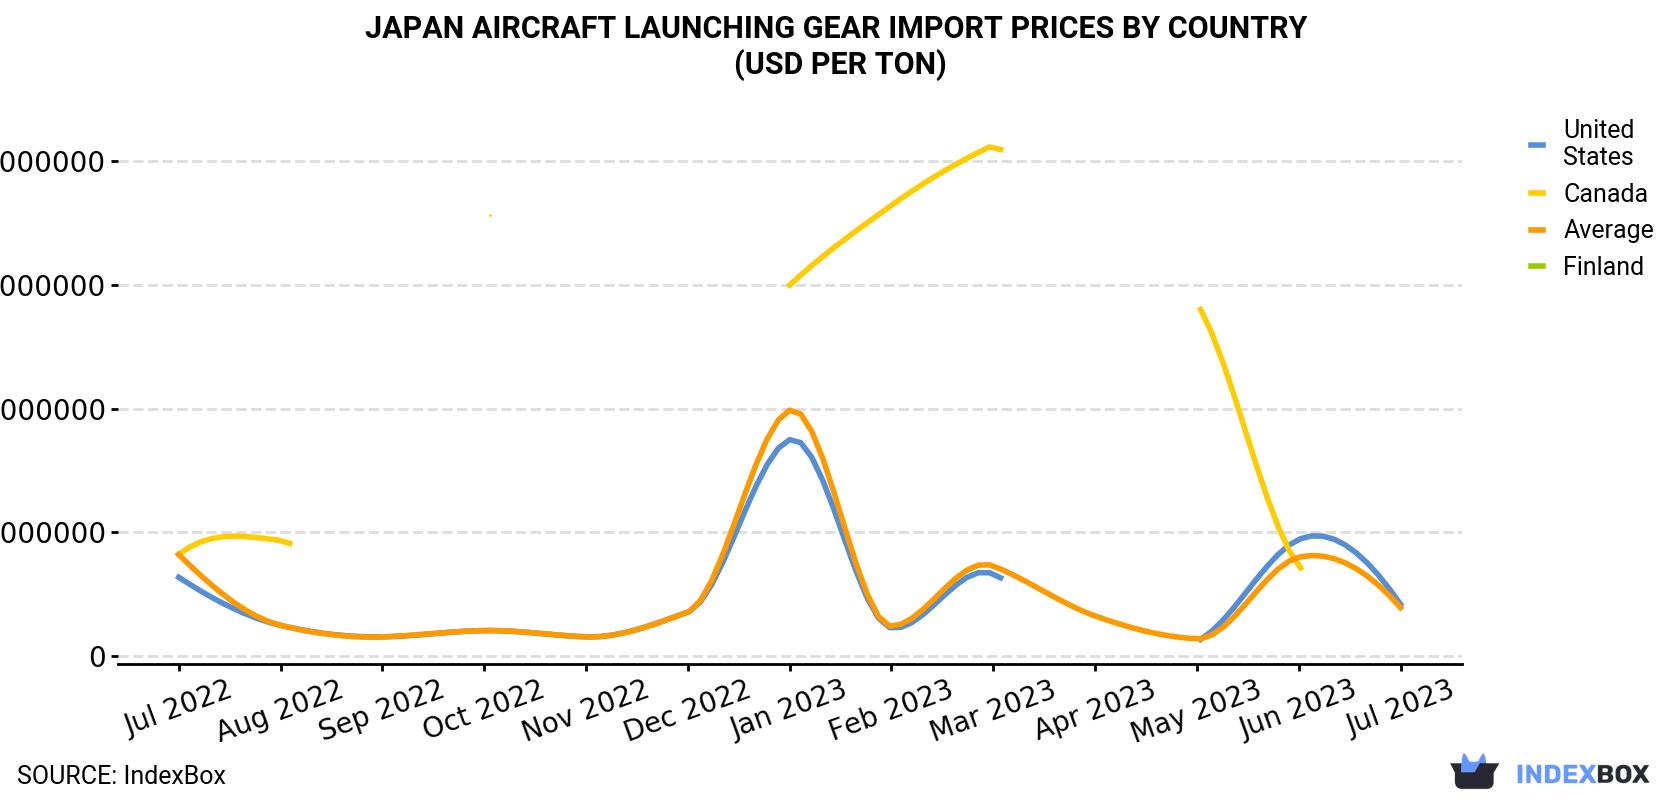 Japan Aircraft Launching Gear Import Prices By Country (USD Per Ton)